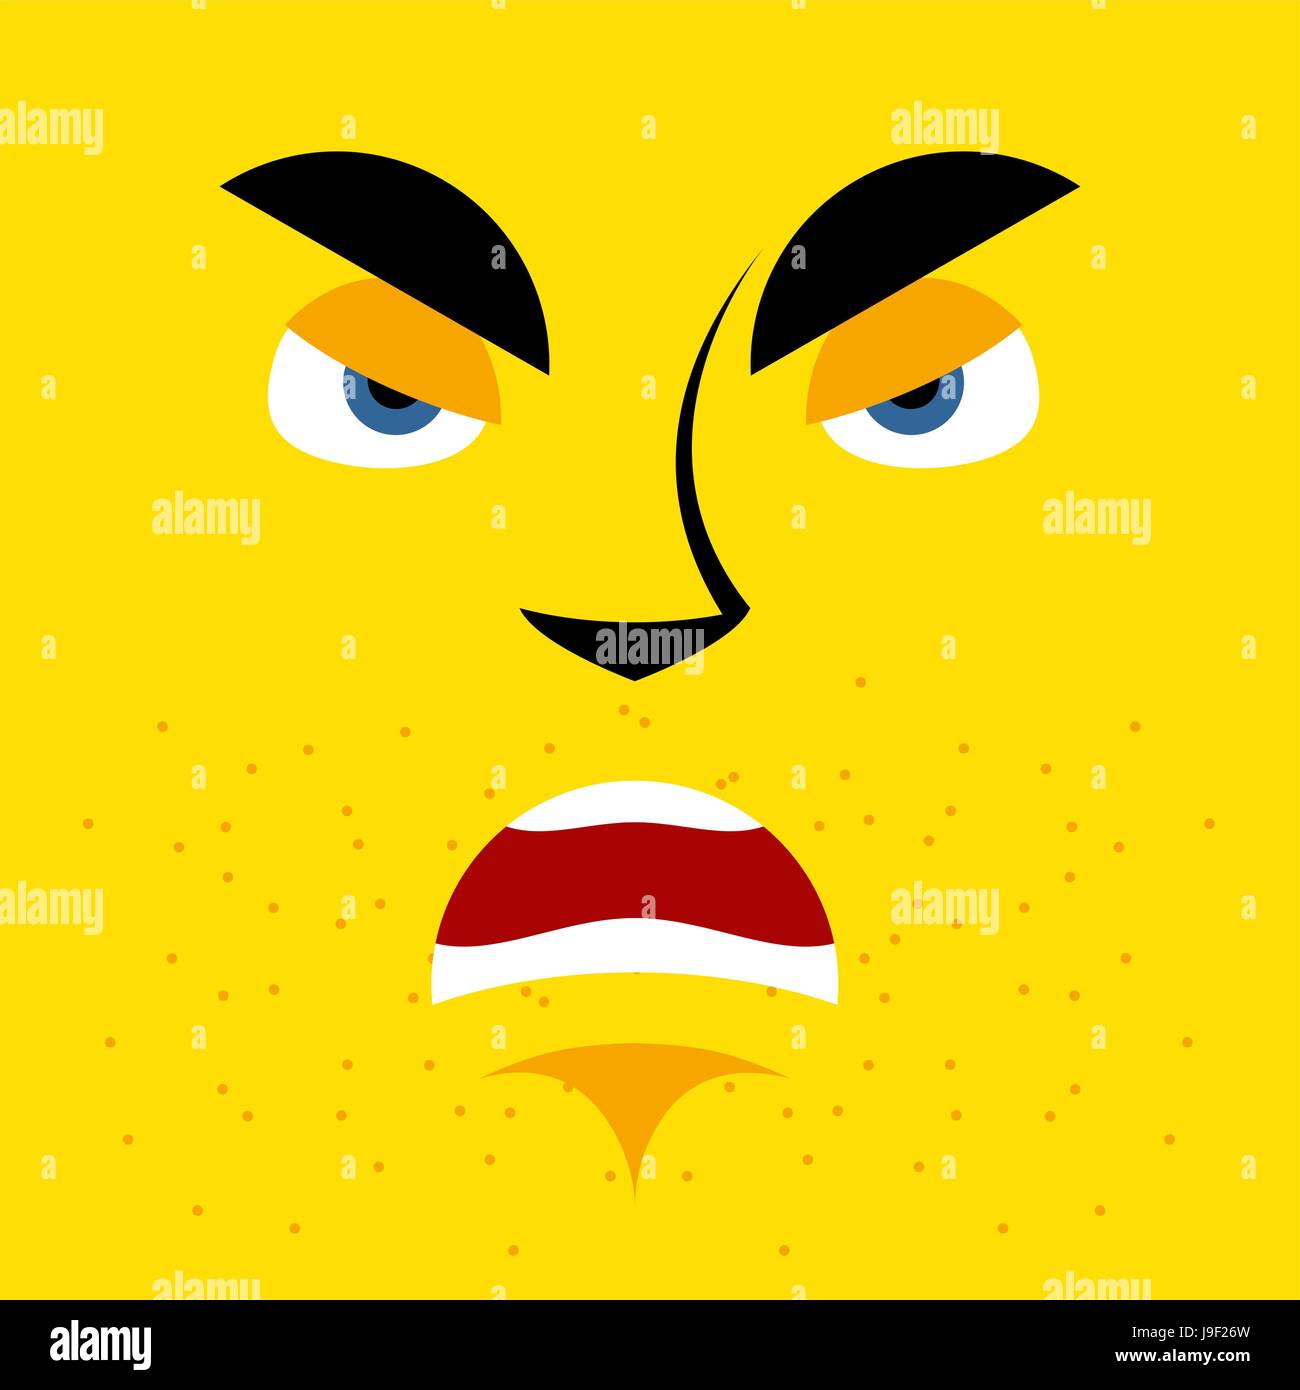 Cartoon angry face on yellow background. aggressive, Grumpy emotion. Dissatisfied with person frowns. Hostile character Stock Vector